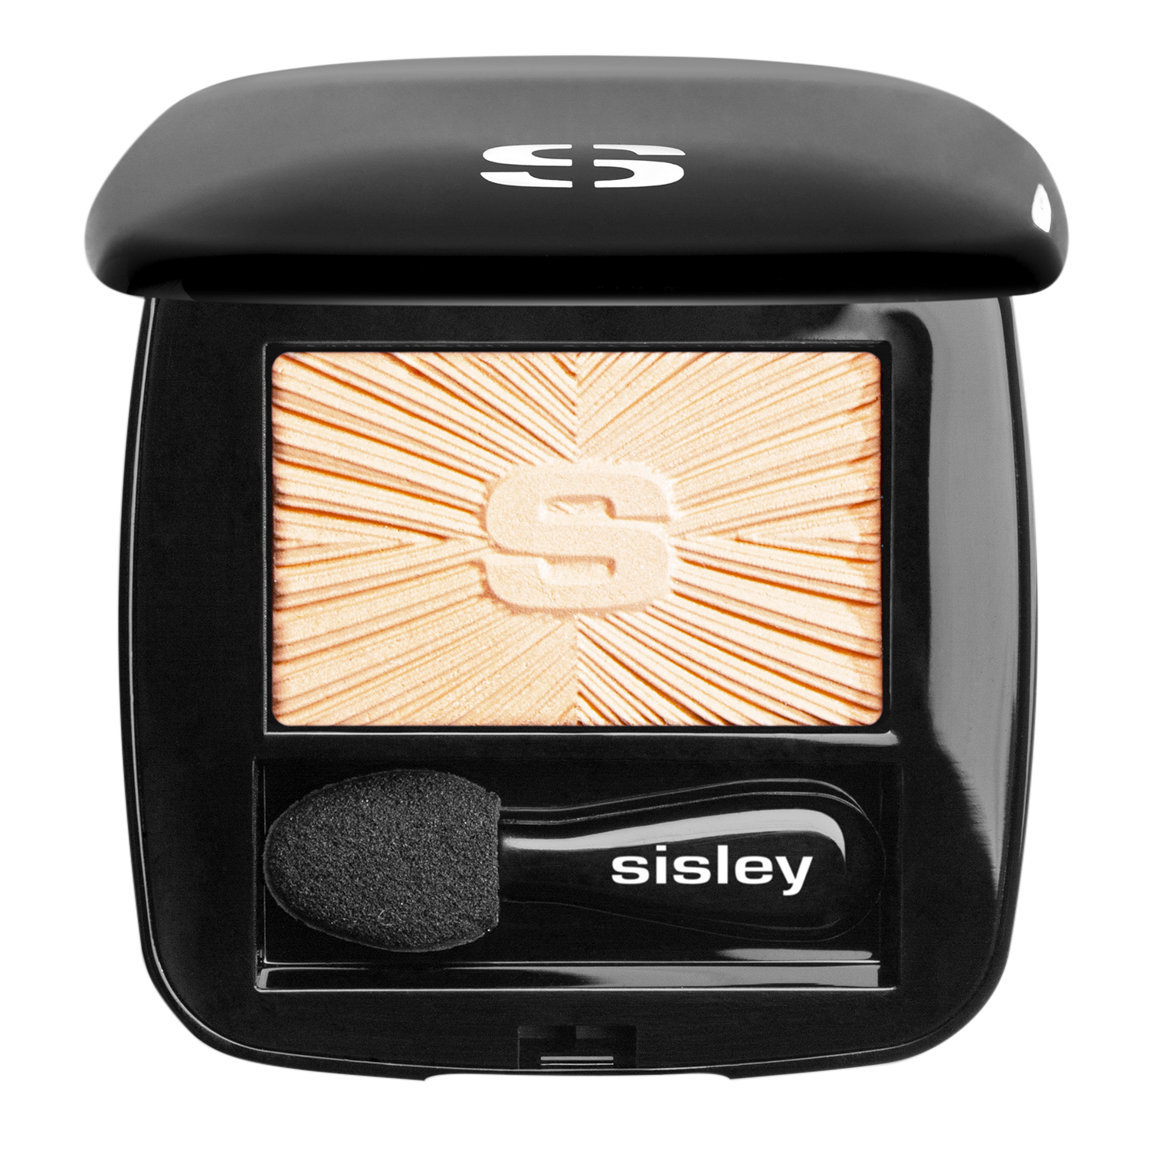 Sisley-Paris Les Phyto-Ombres Eyeshadow 10 Silky Cream alternative view 1 - product swatch.